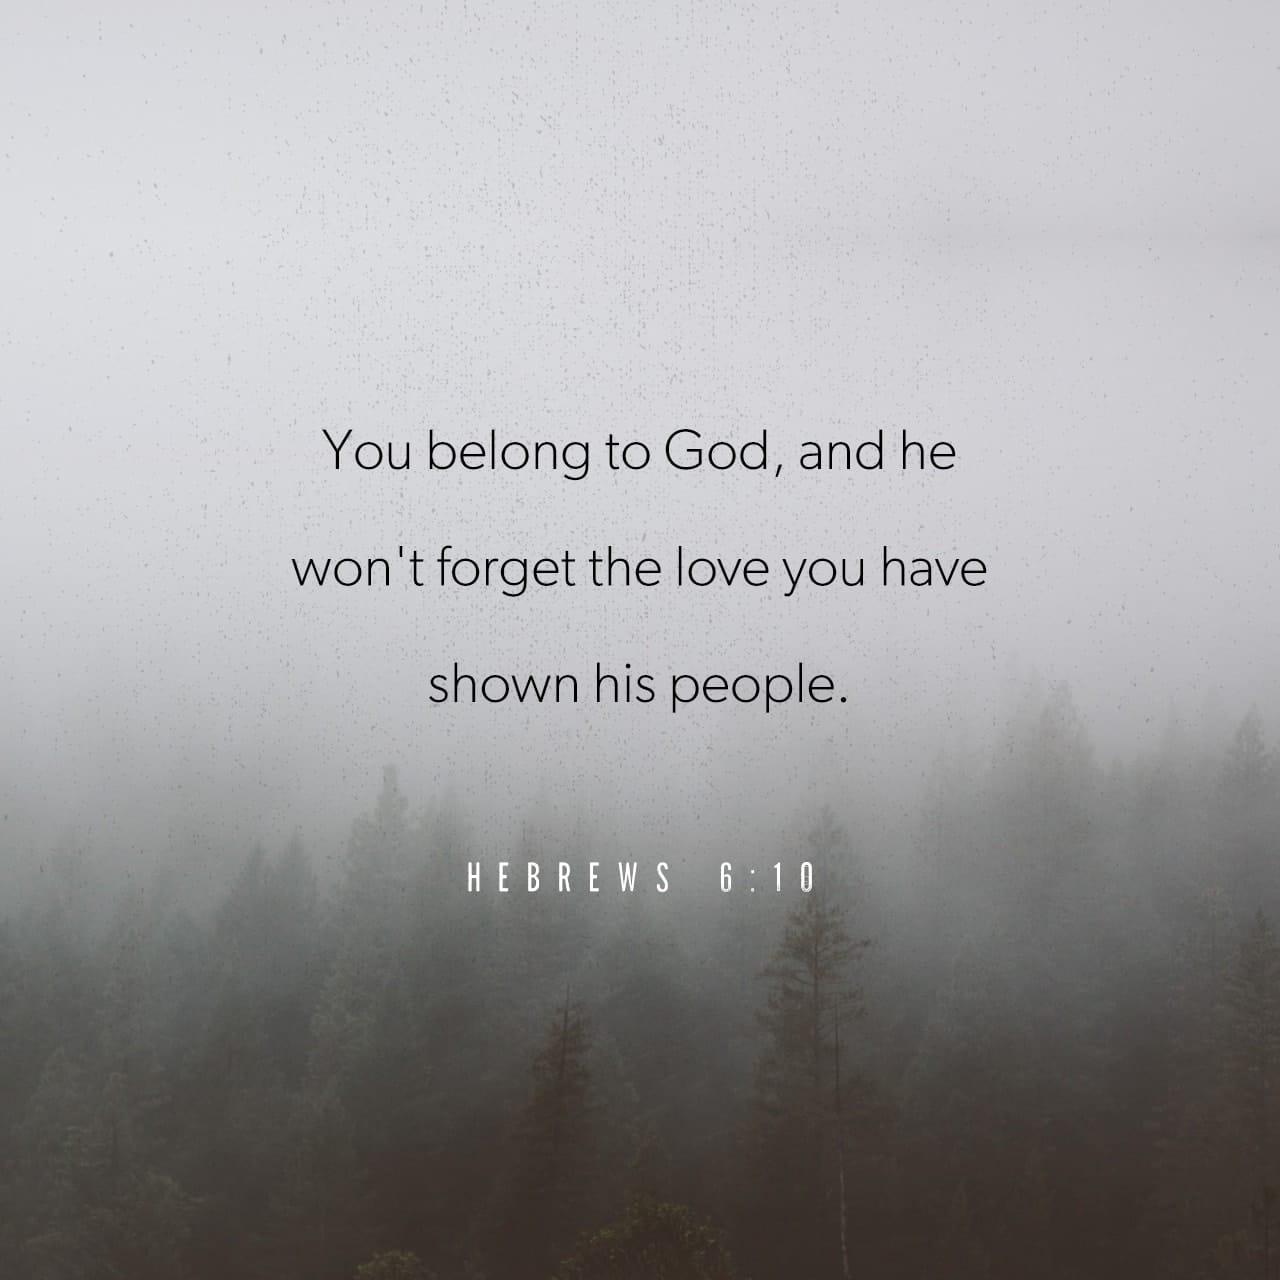 Bible Verse of the Day - day 86 - image 1761 (Hebrews 6:1-13)